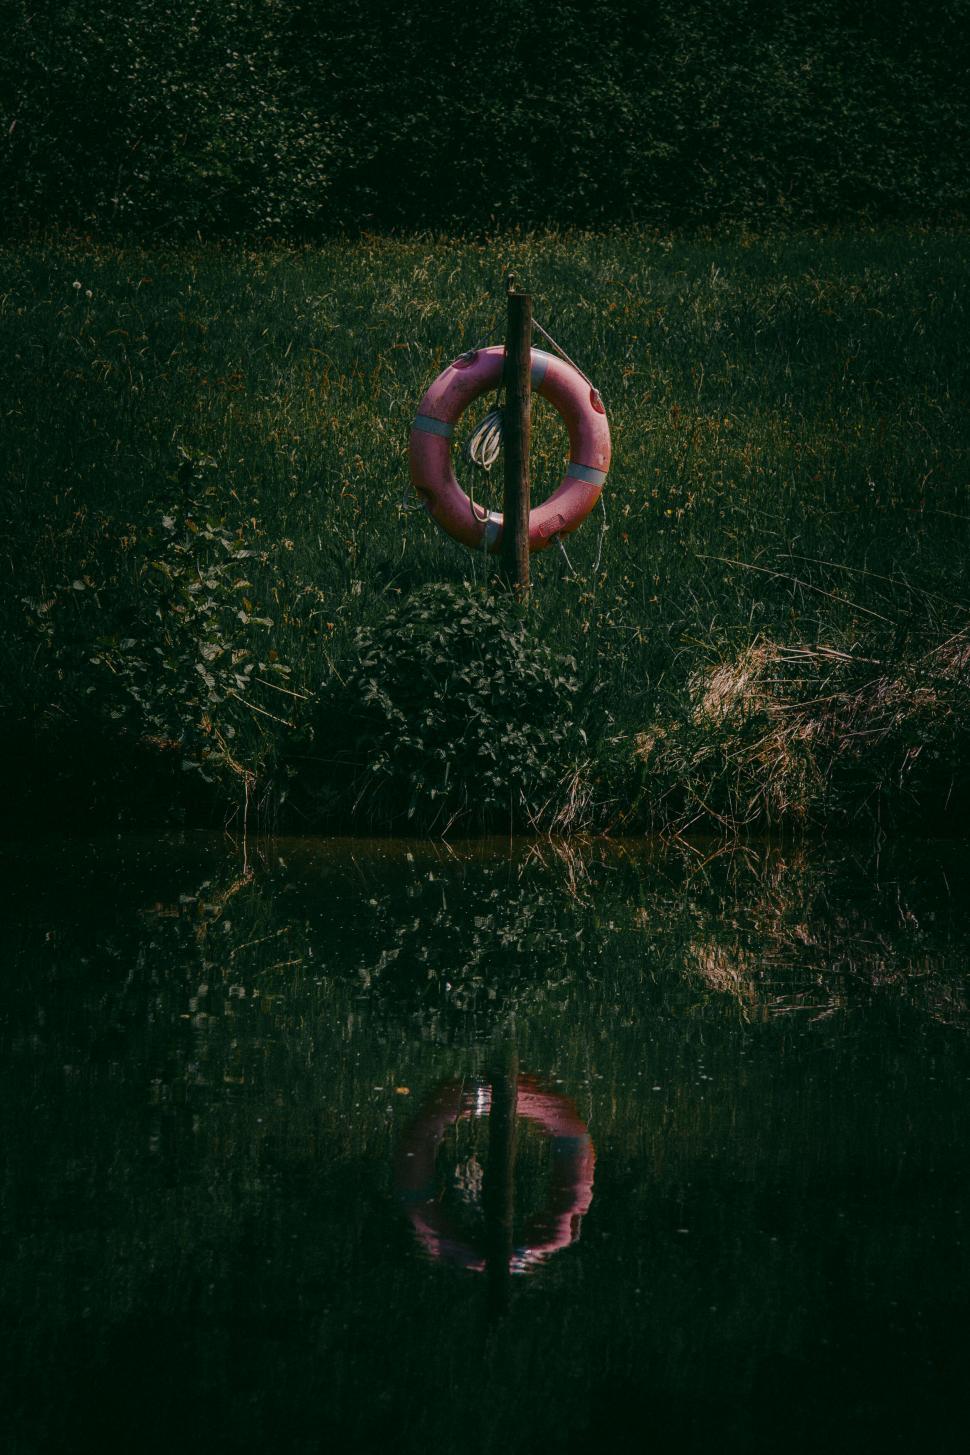 Free Image of Lifebuoy on pole reflected in dark water 